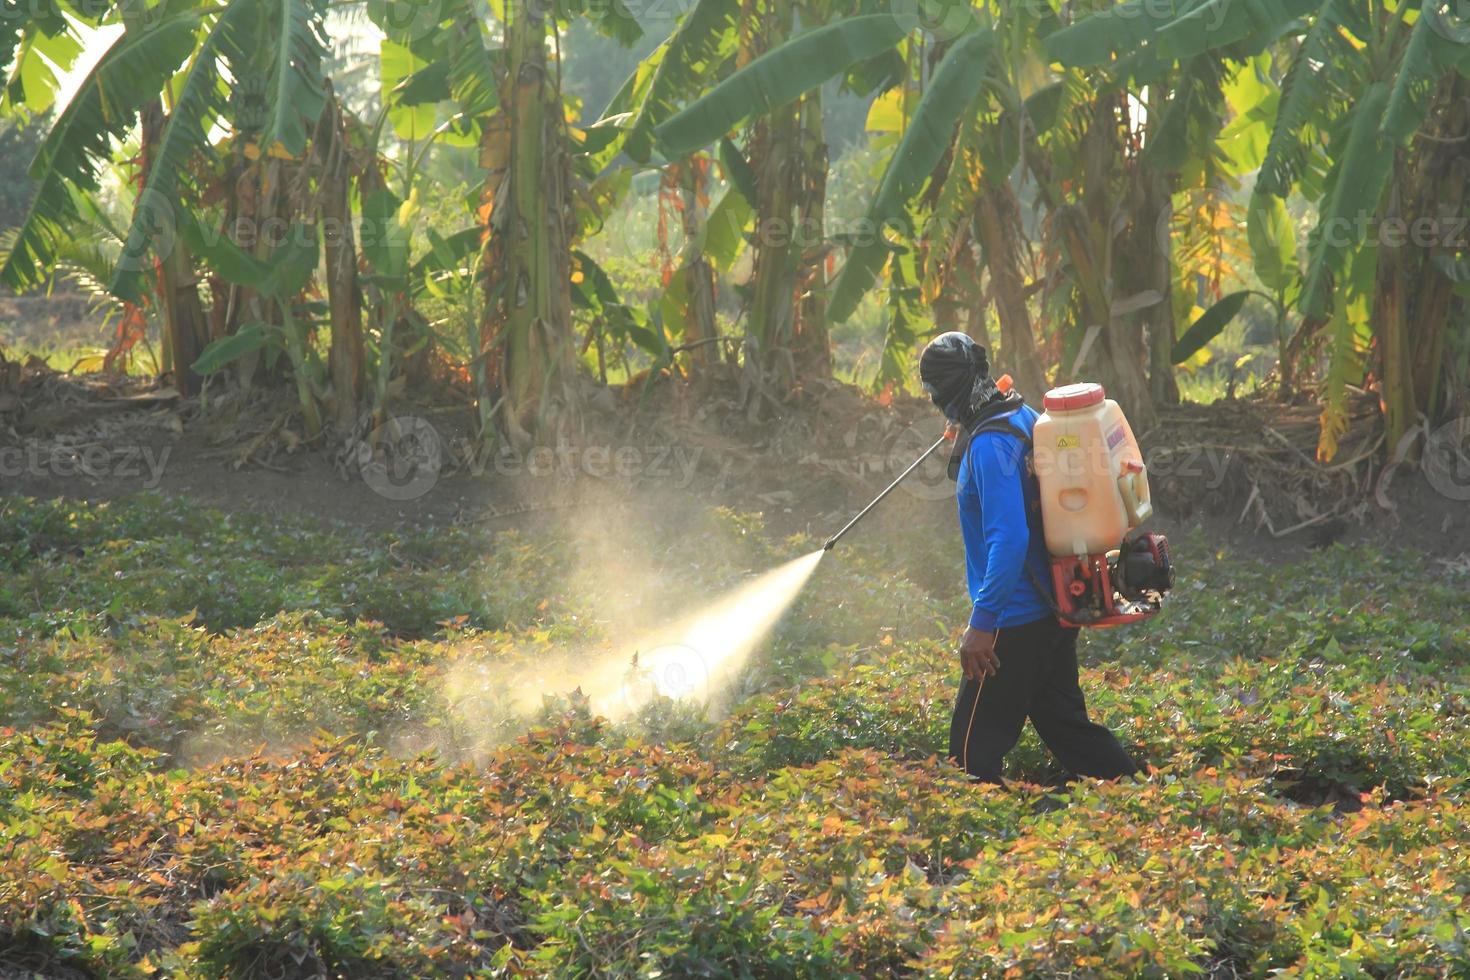 Farmers are spraying pesticides in the sweet potato plantations so that pests do not interfere and damage agricultural products. photo